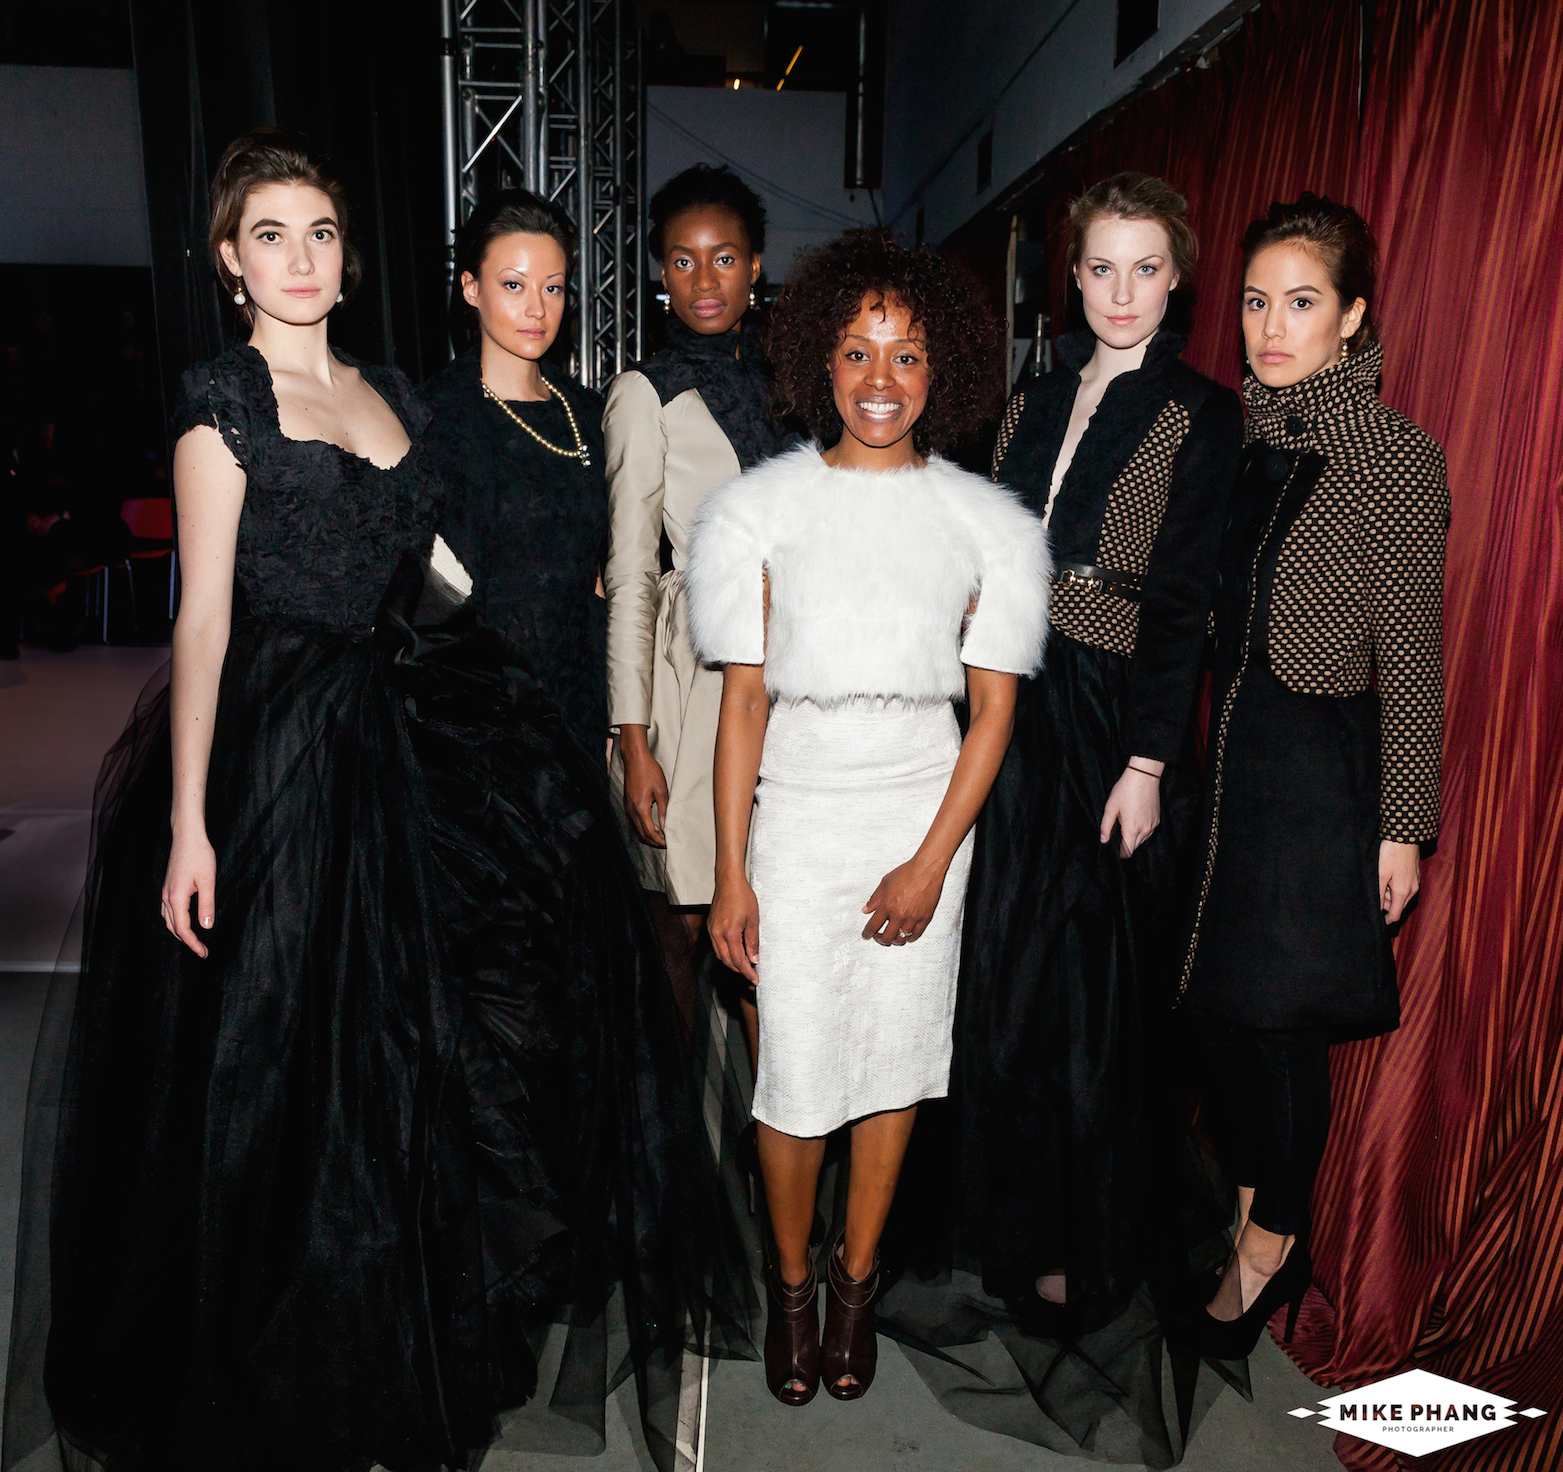 Sophie Karen (middle in all white outfit) and models at Vancouver Fashion Week. Photo credit: Mike Phang